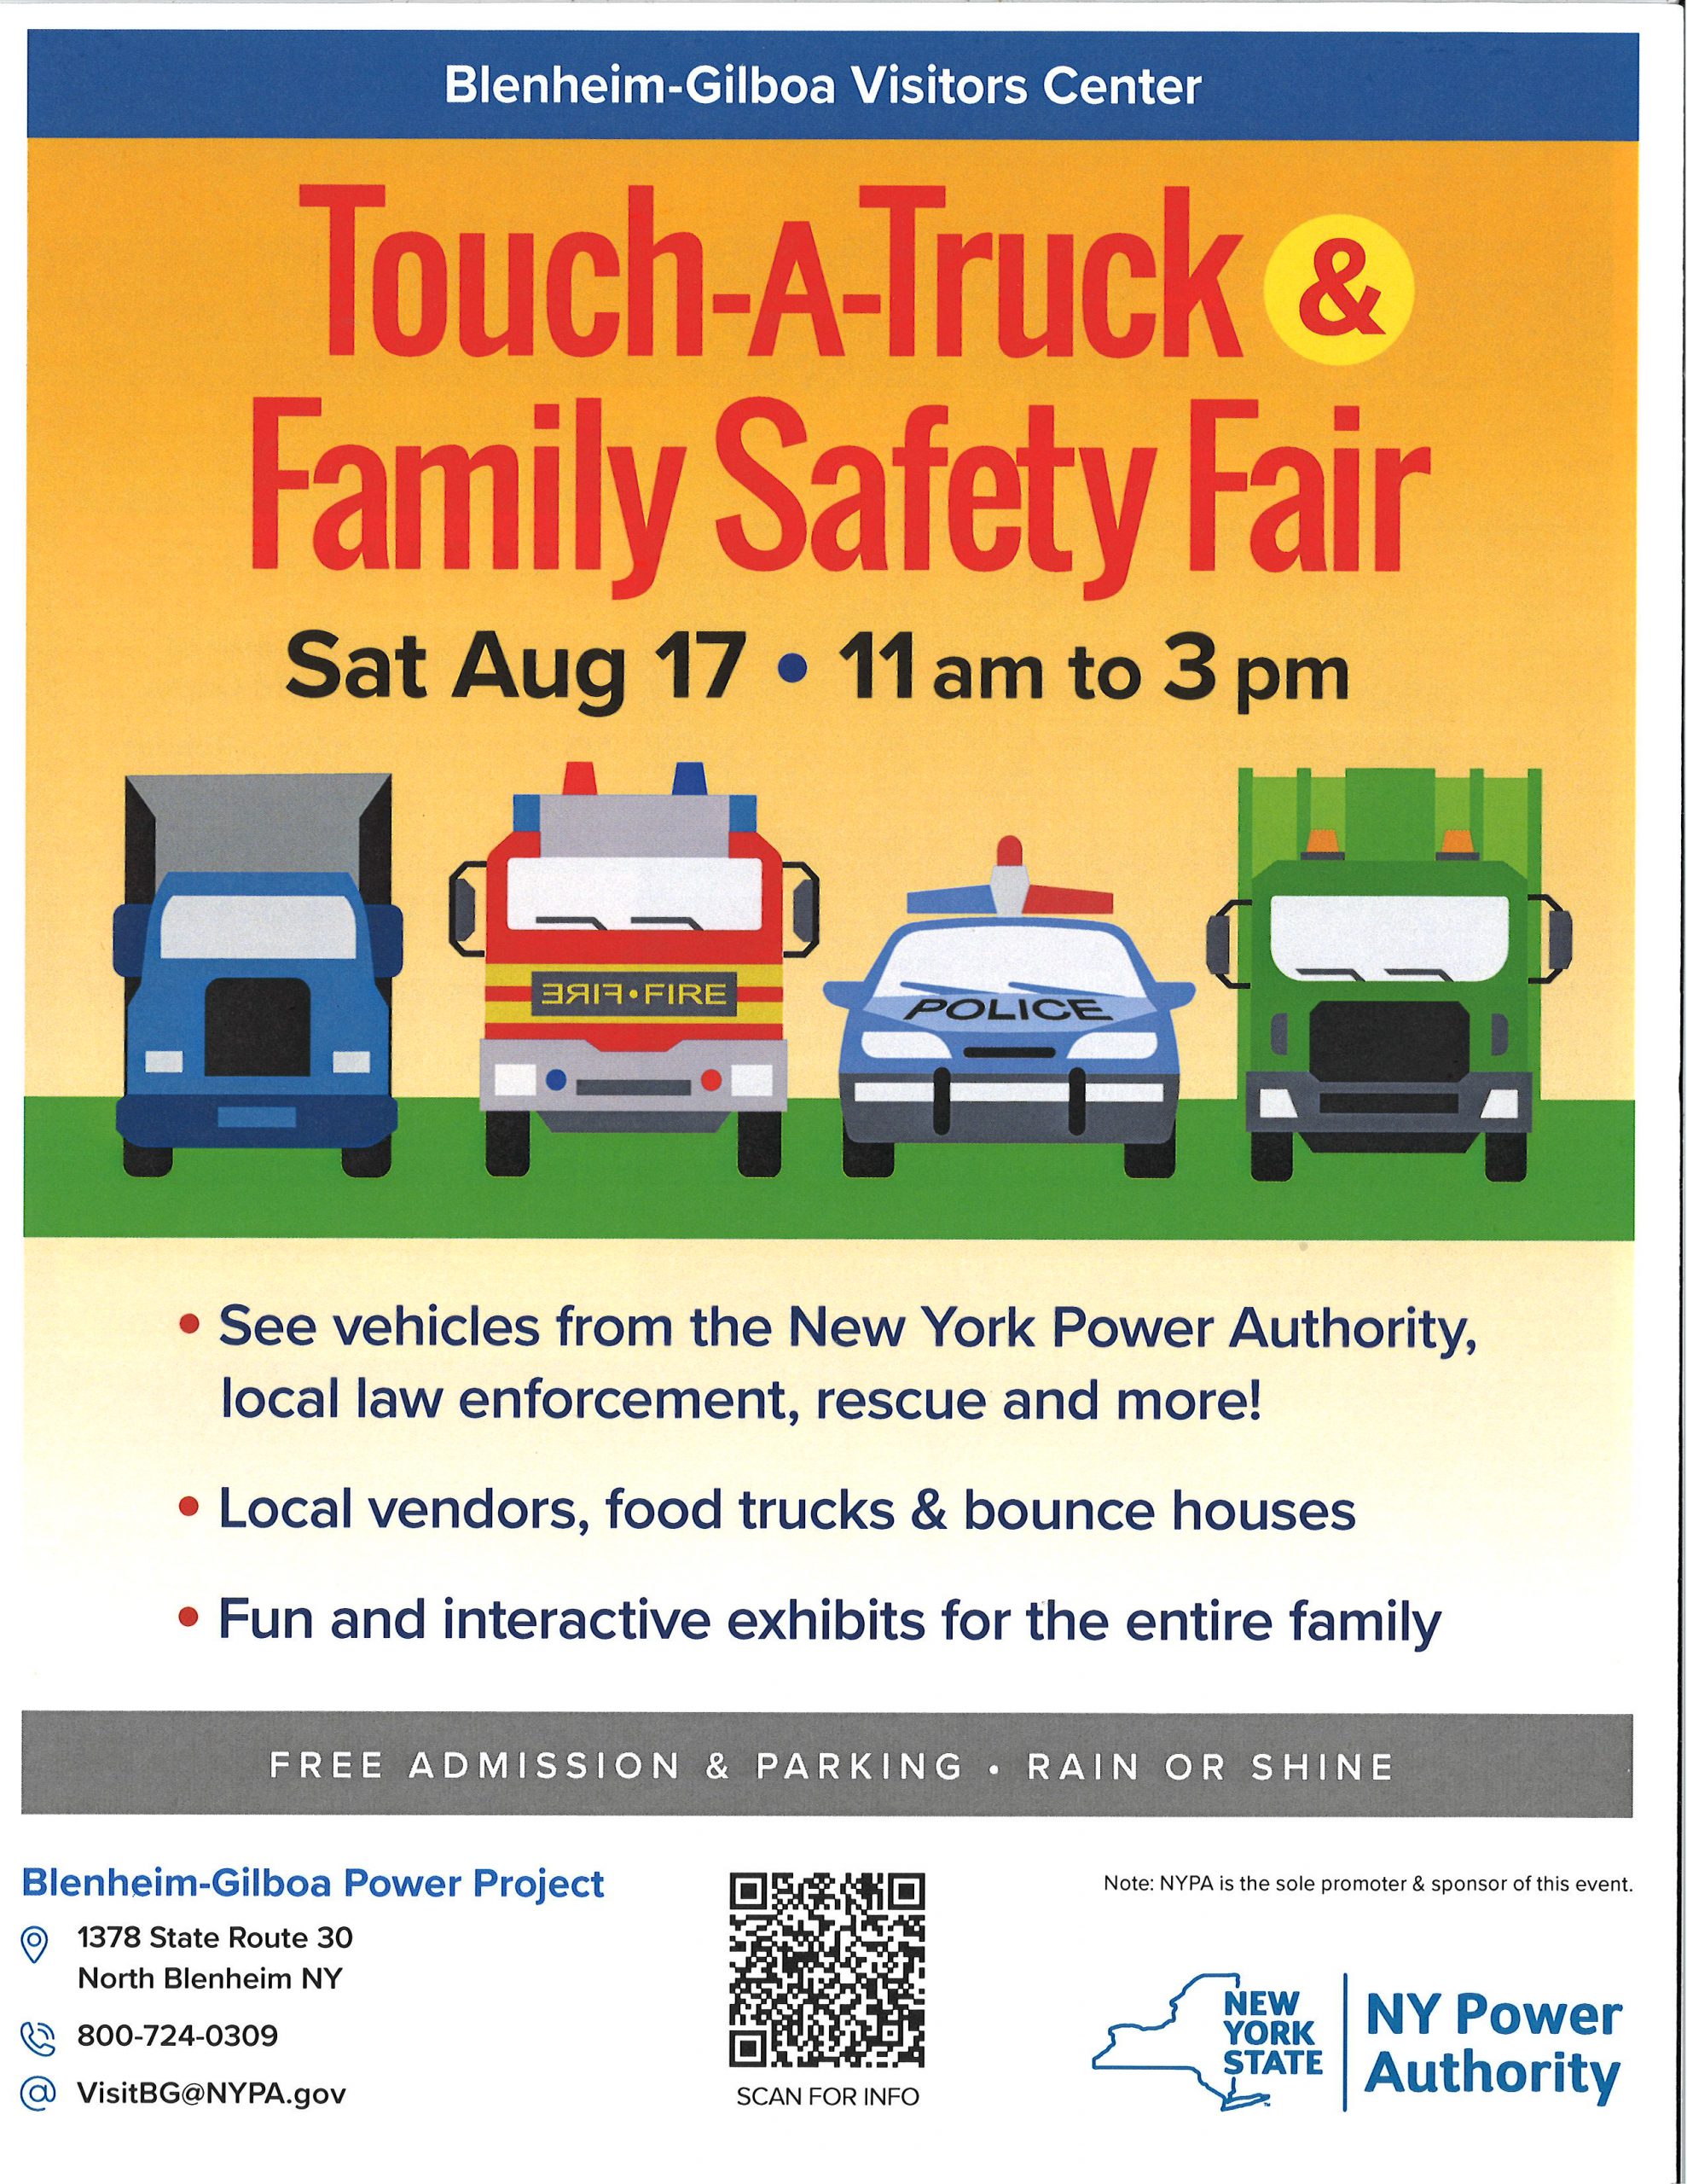 Blenheim-Gilboa Visitor Center. Touch a Truck and Family Safety Fair. Saturday, August 17, 11 AM to 3 PM. Firetruck, police car, utility trucks. See vehicles from the New York Power Authority, local law enforcement, rescue and more! Local vendors, food trucks, and bounce houses. Fun and interactive exhibits for the entire family. Free admission and parking. Rain or shine. Blenheim-Gilboa Power Project, 1378 State Rd. 30, North Blenheim, New York. 800-724-0309. Visit BG@ Nypa.gov. Note: BP is the sole promoter and sponsor of this event. New York State. NY Power Authority.